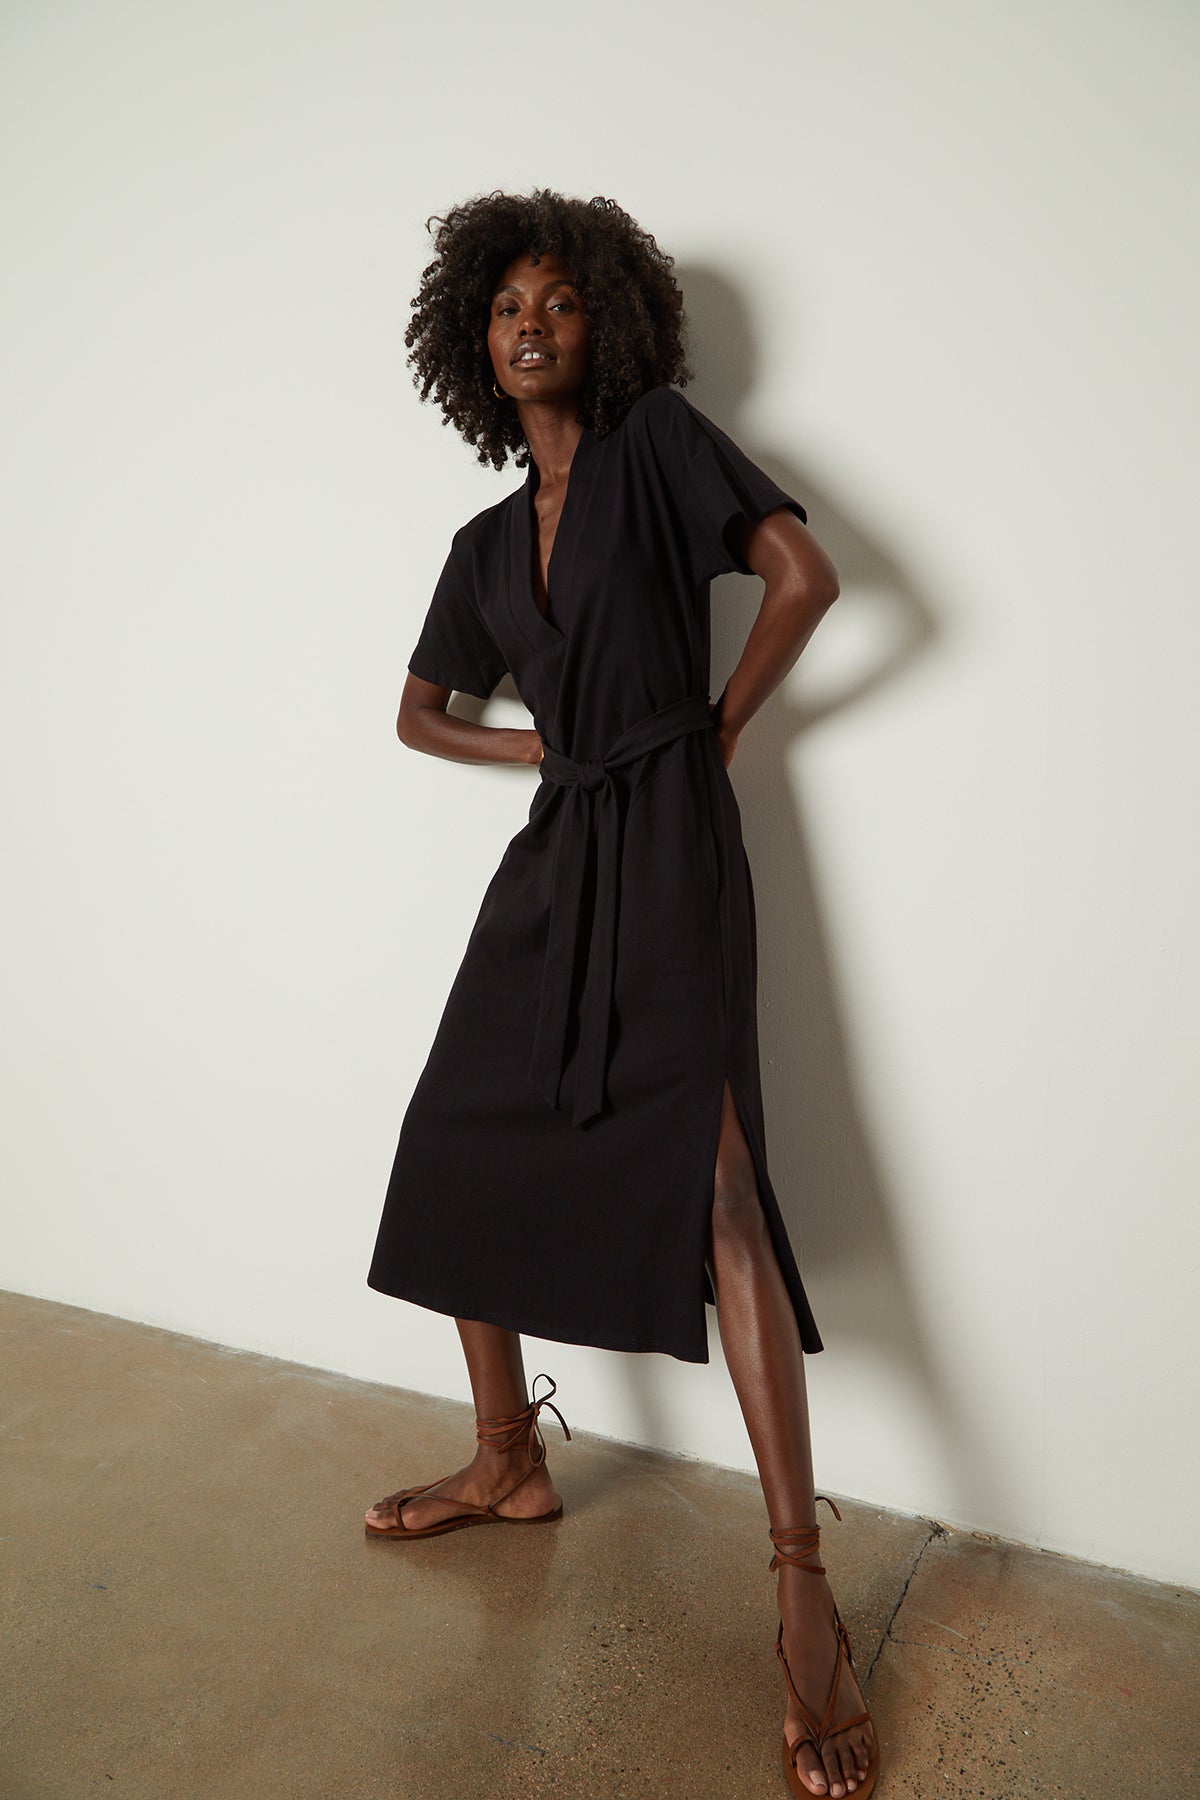 The model is wearing a black NORA STRUCTURED DRESS by Velvet by Graham & Spencer with a belt.-26143079596225